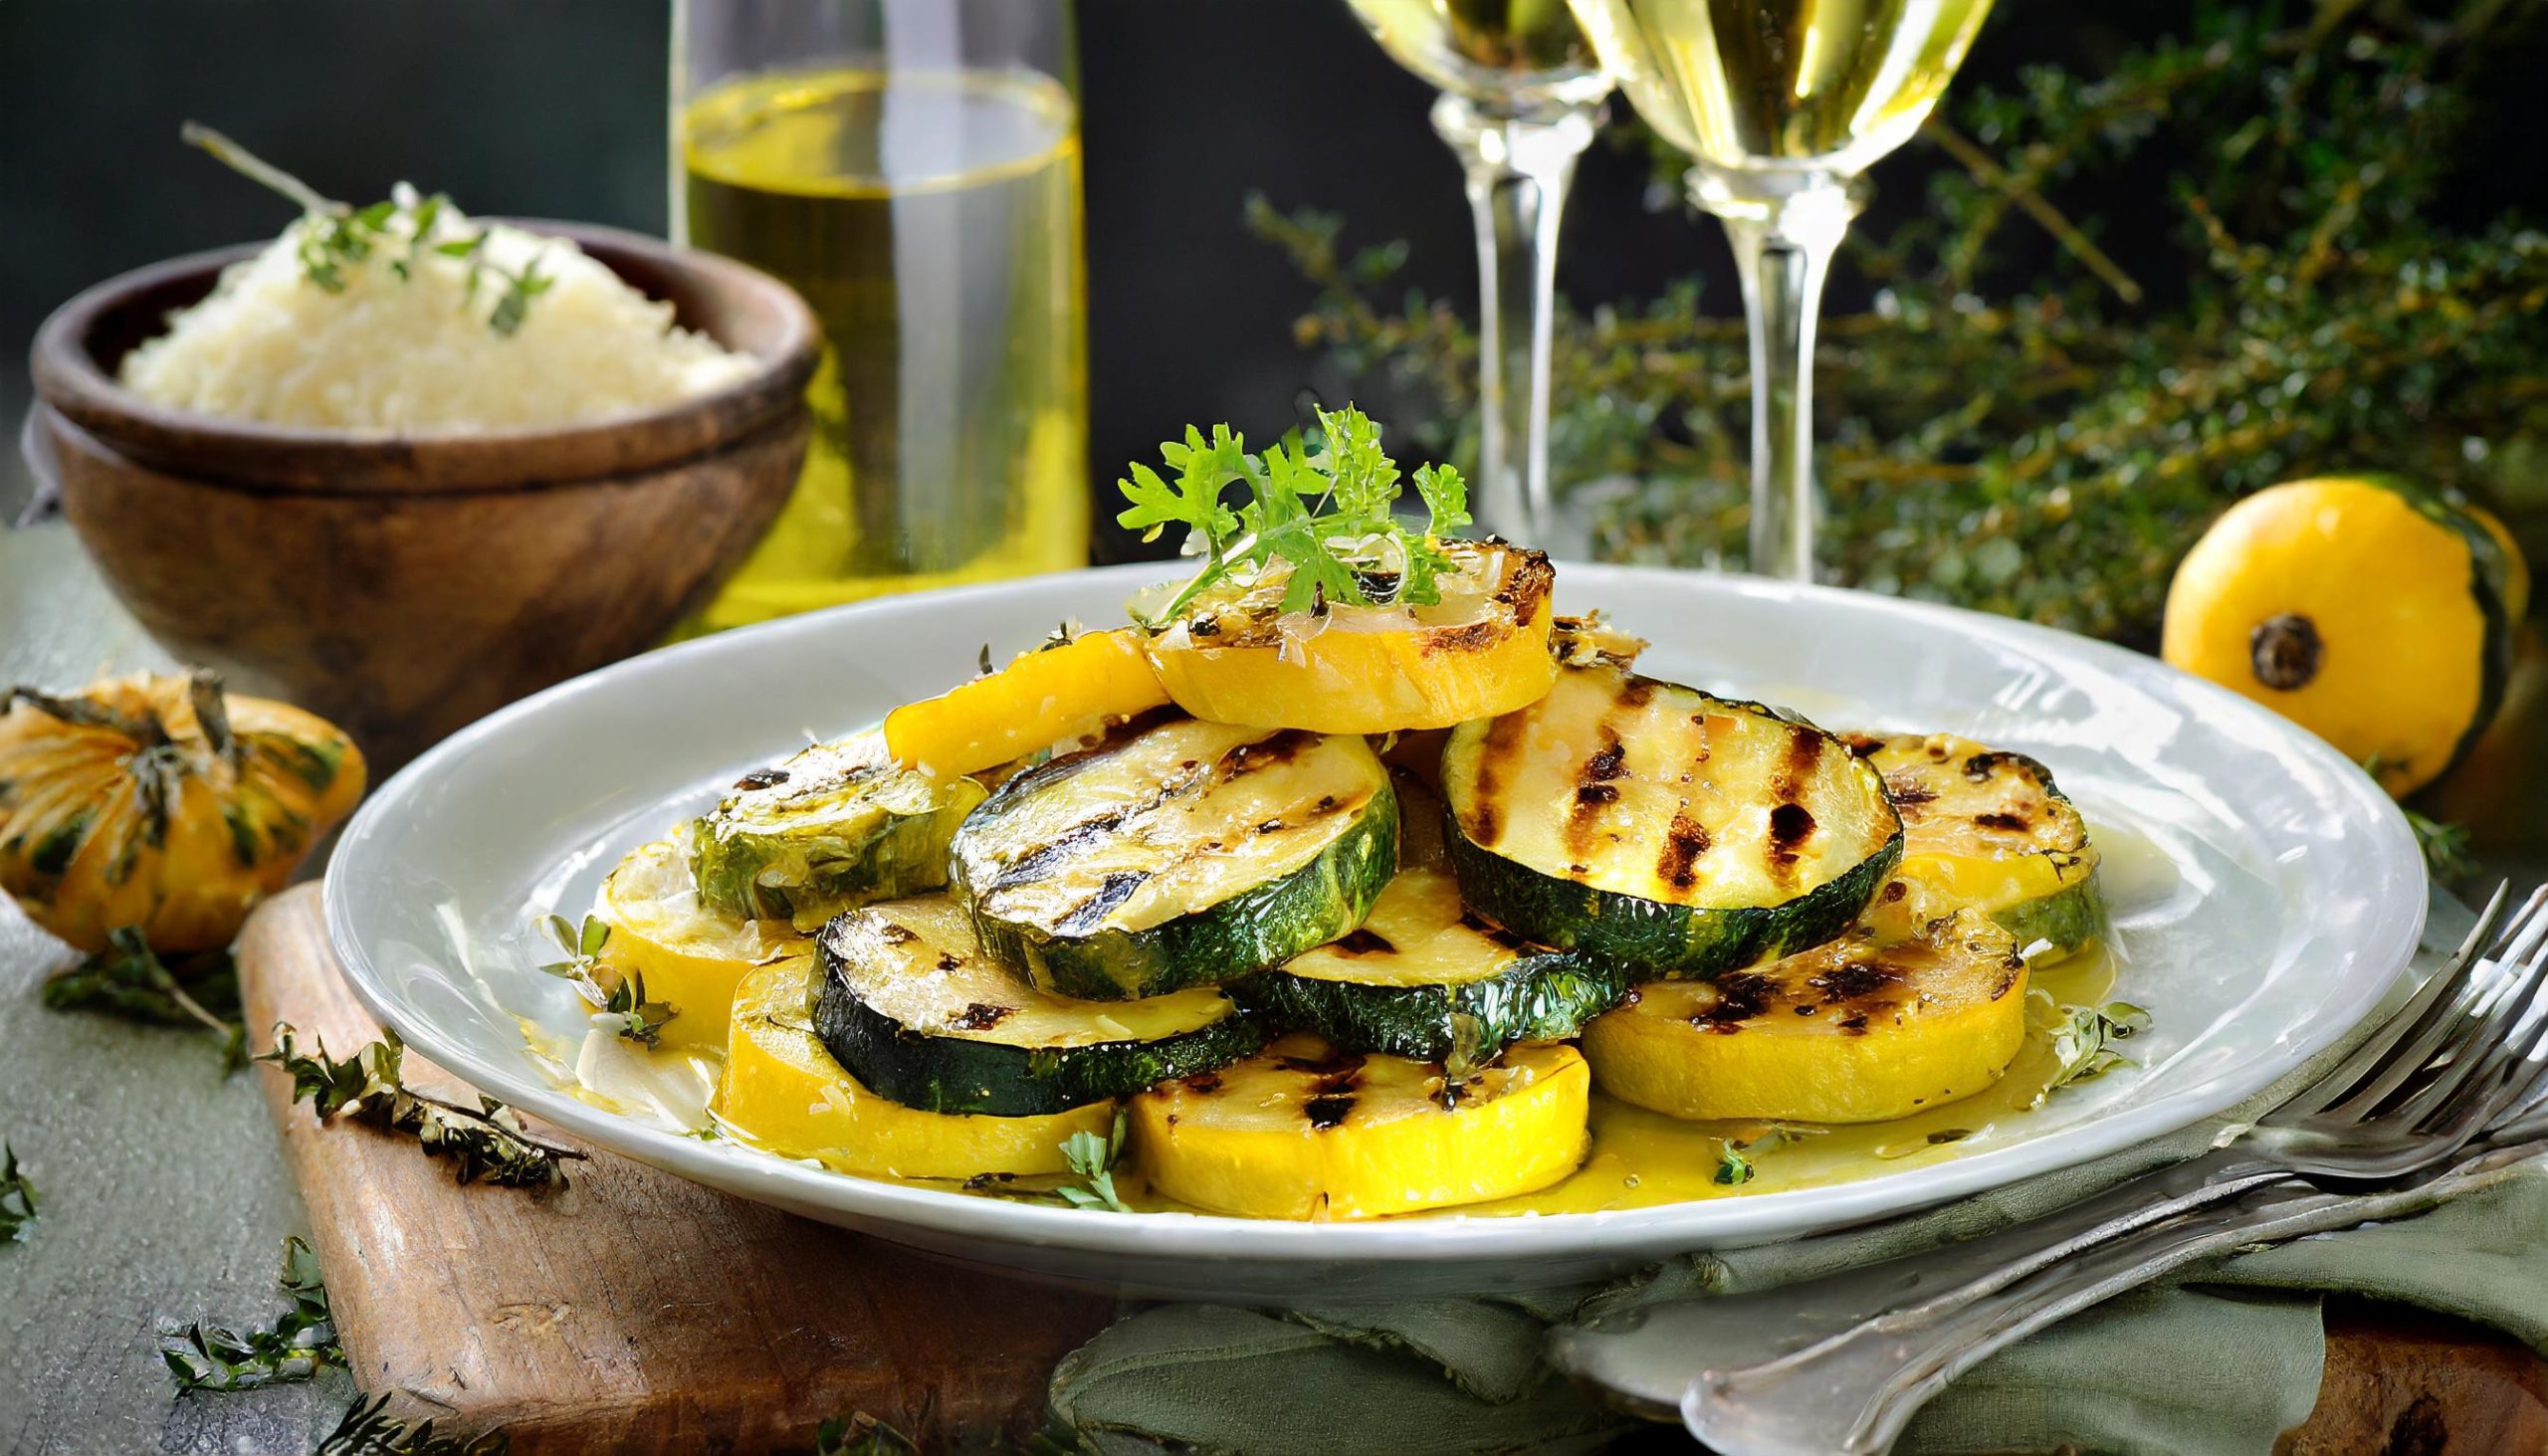 Grilled zucchini and yellow squash with champagne vinaigrette